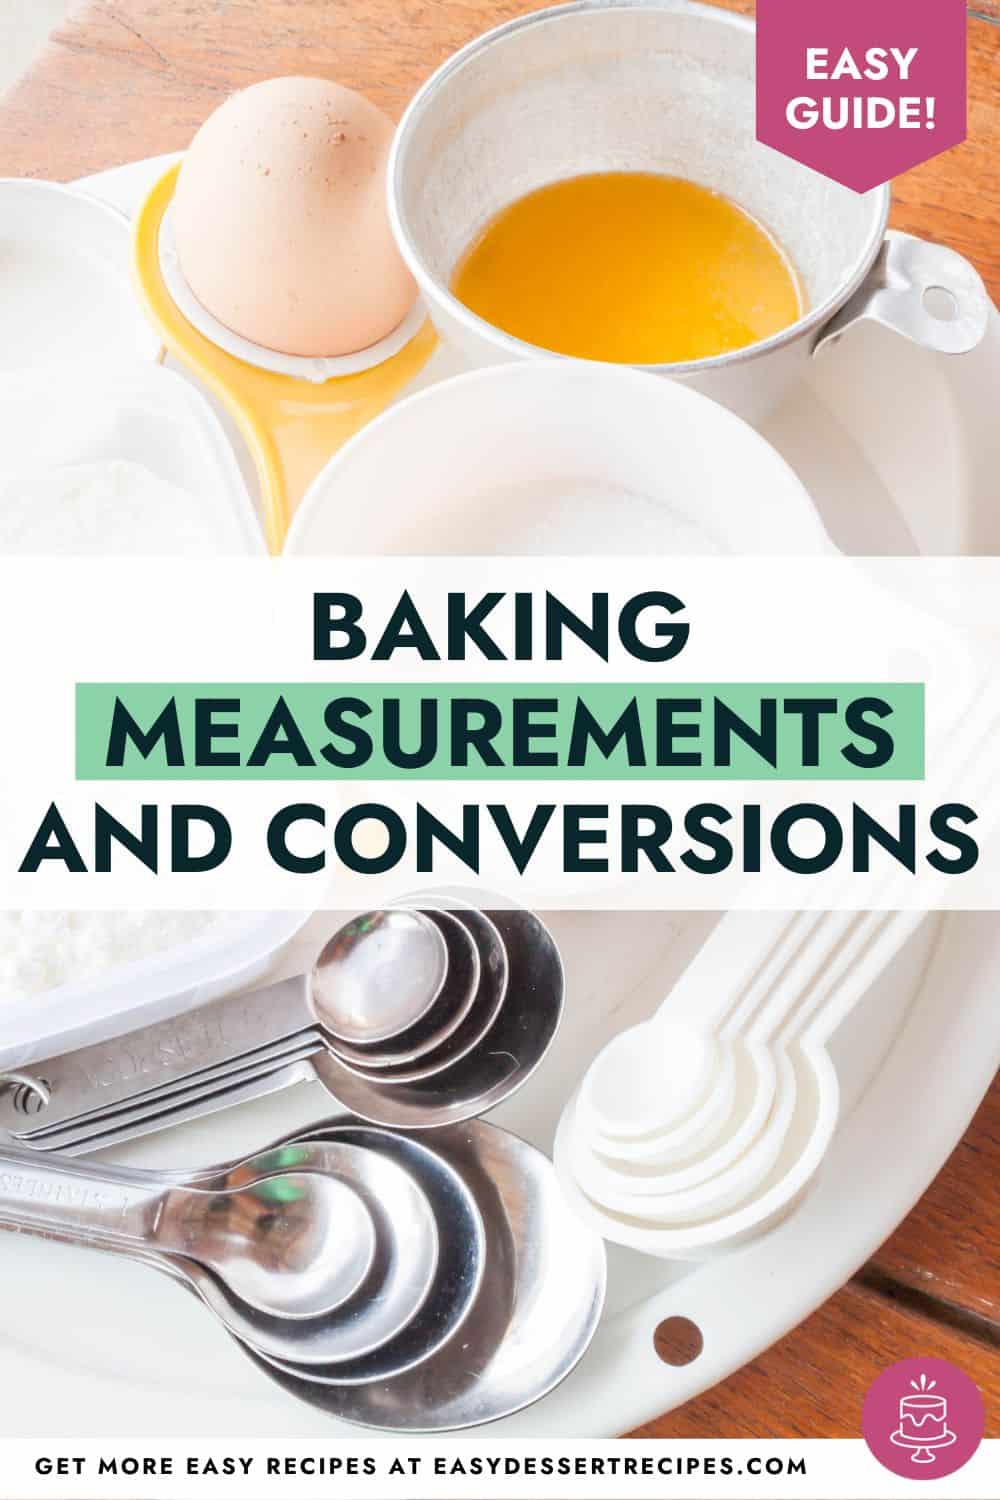 easy guide baking measurements and conversions.